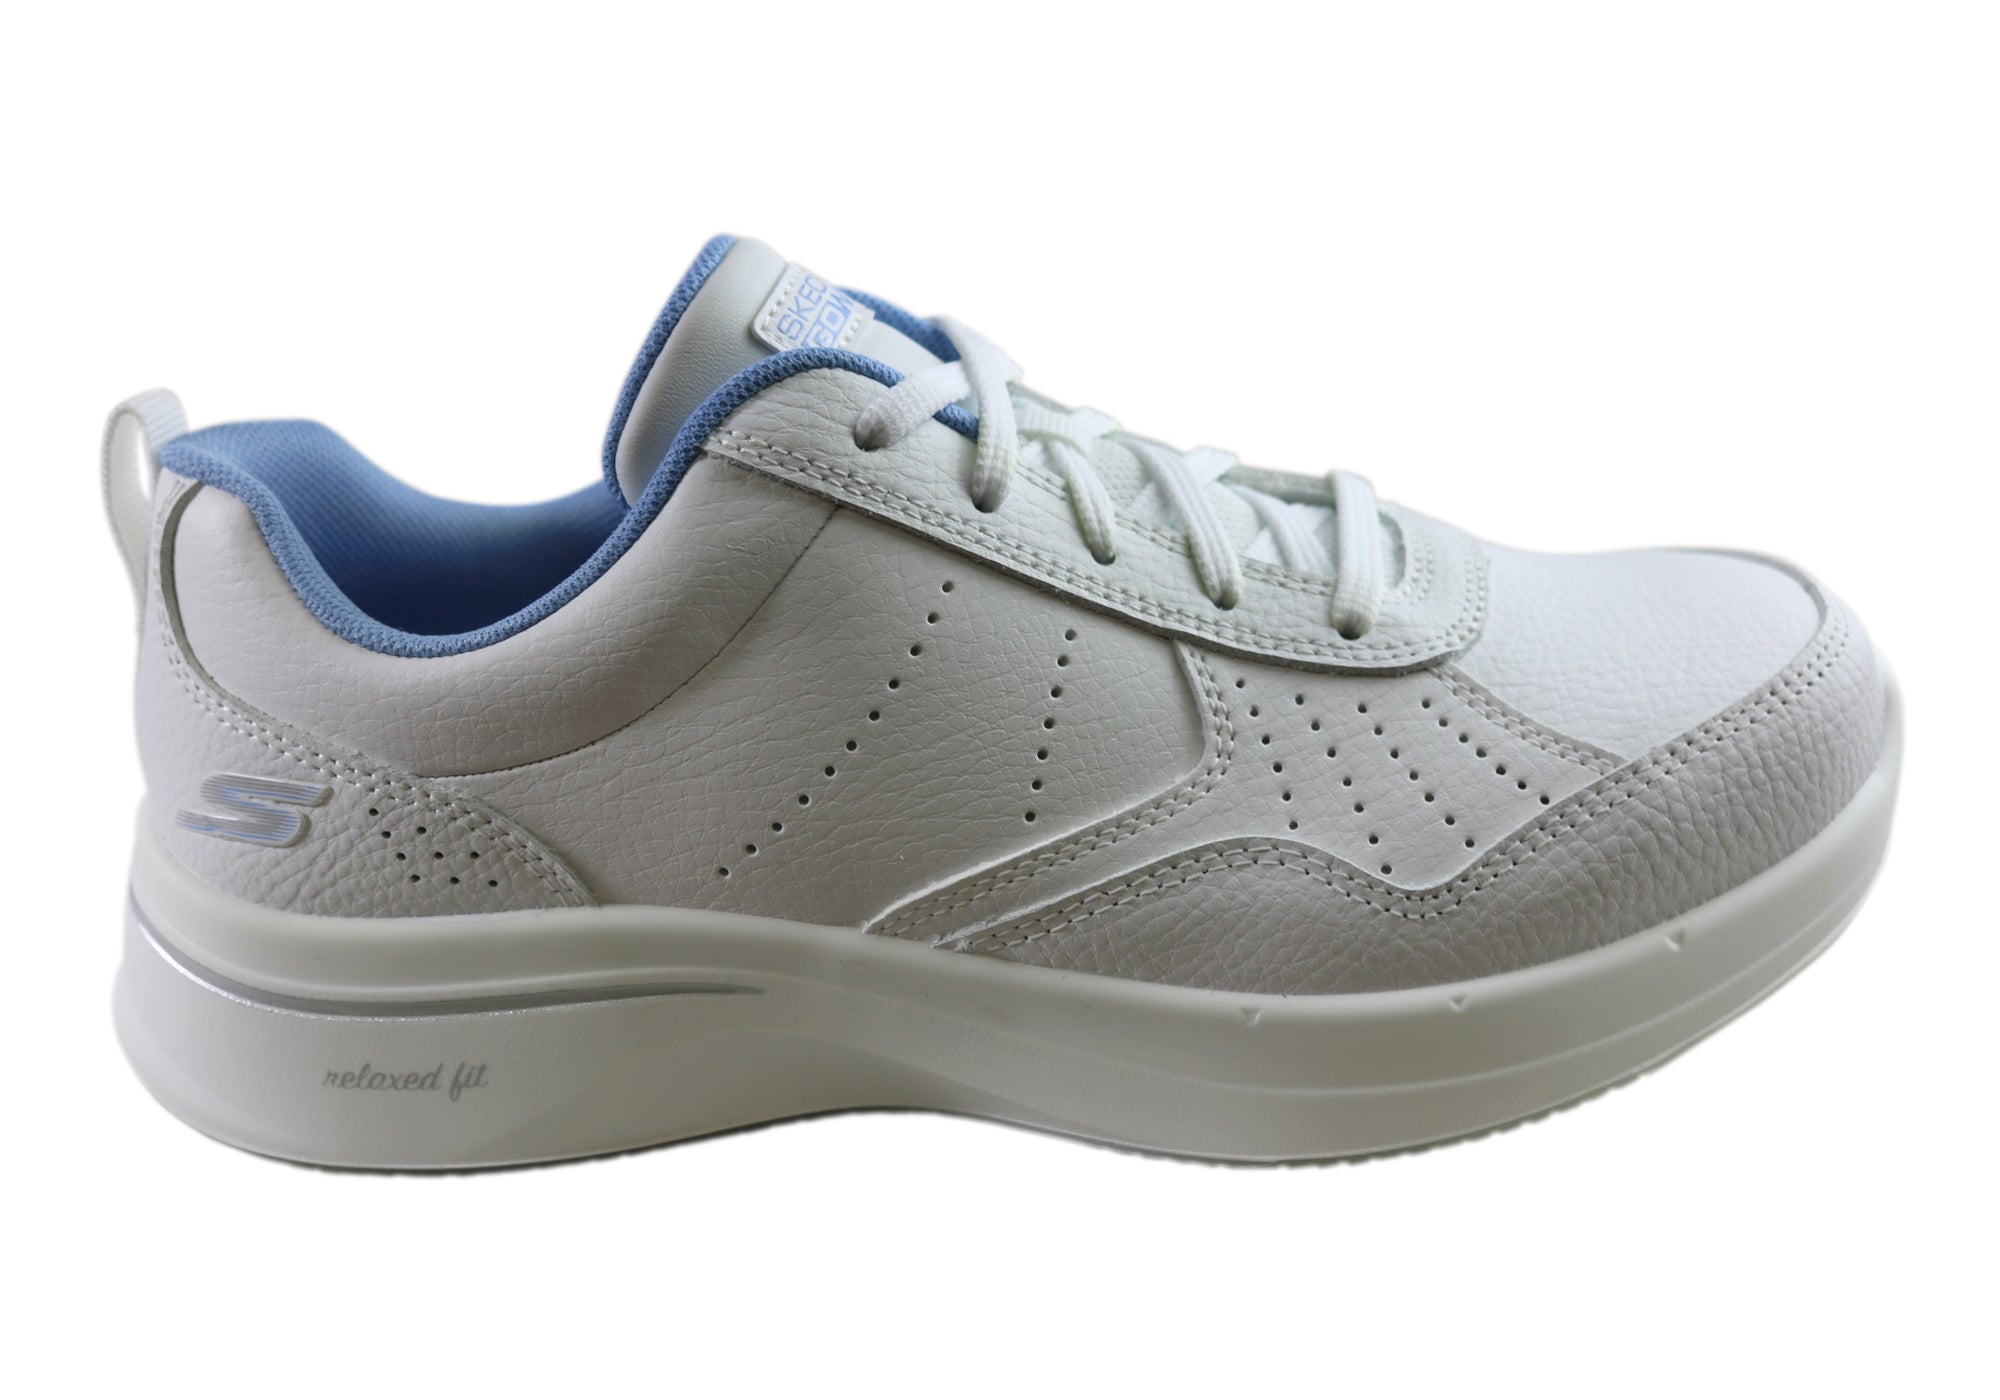 sketchers white leather shoes